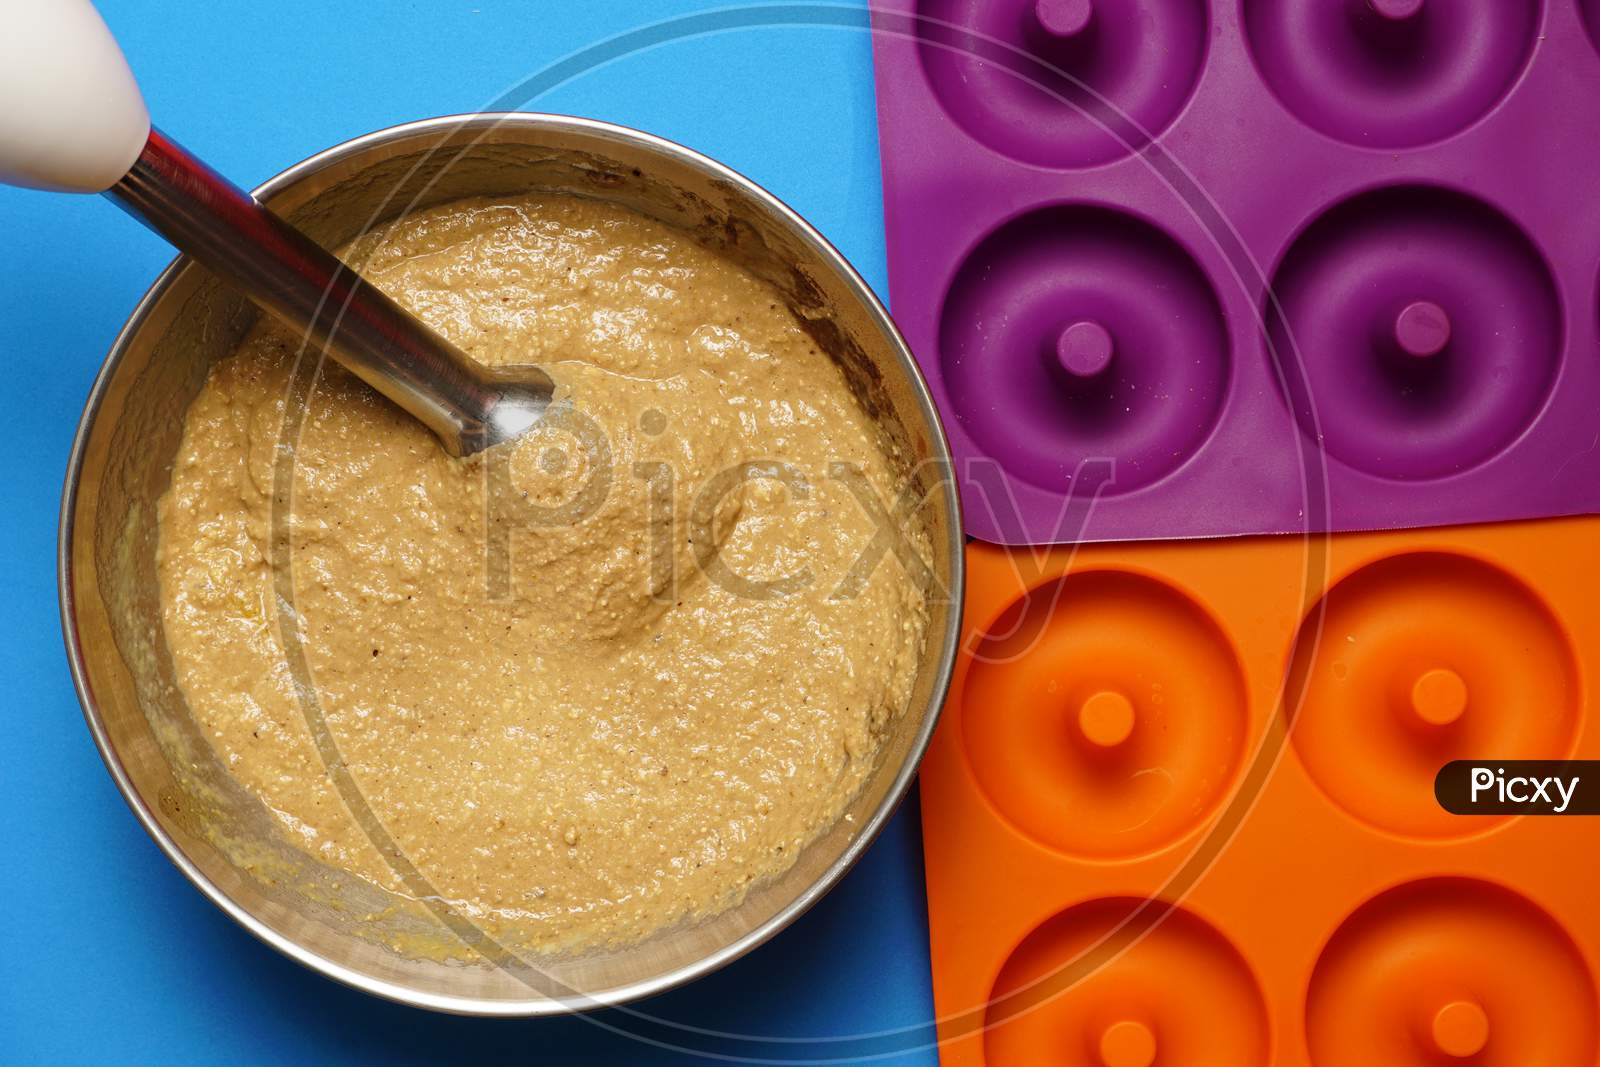 Top View Of Cake Mix In Bowl With Mixer And Molds Beside. Cooking Concept. Flat Lat Flat Design